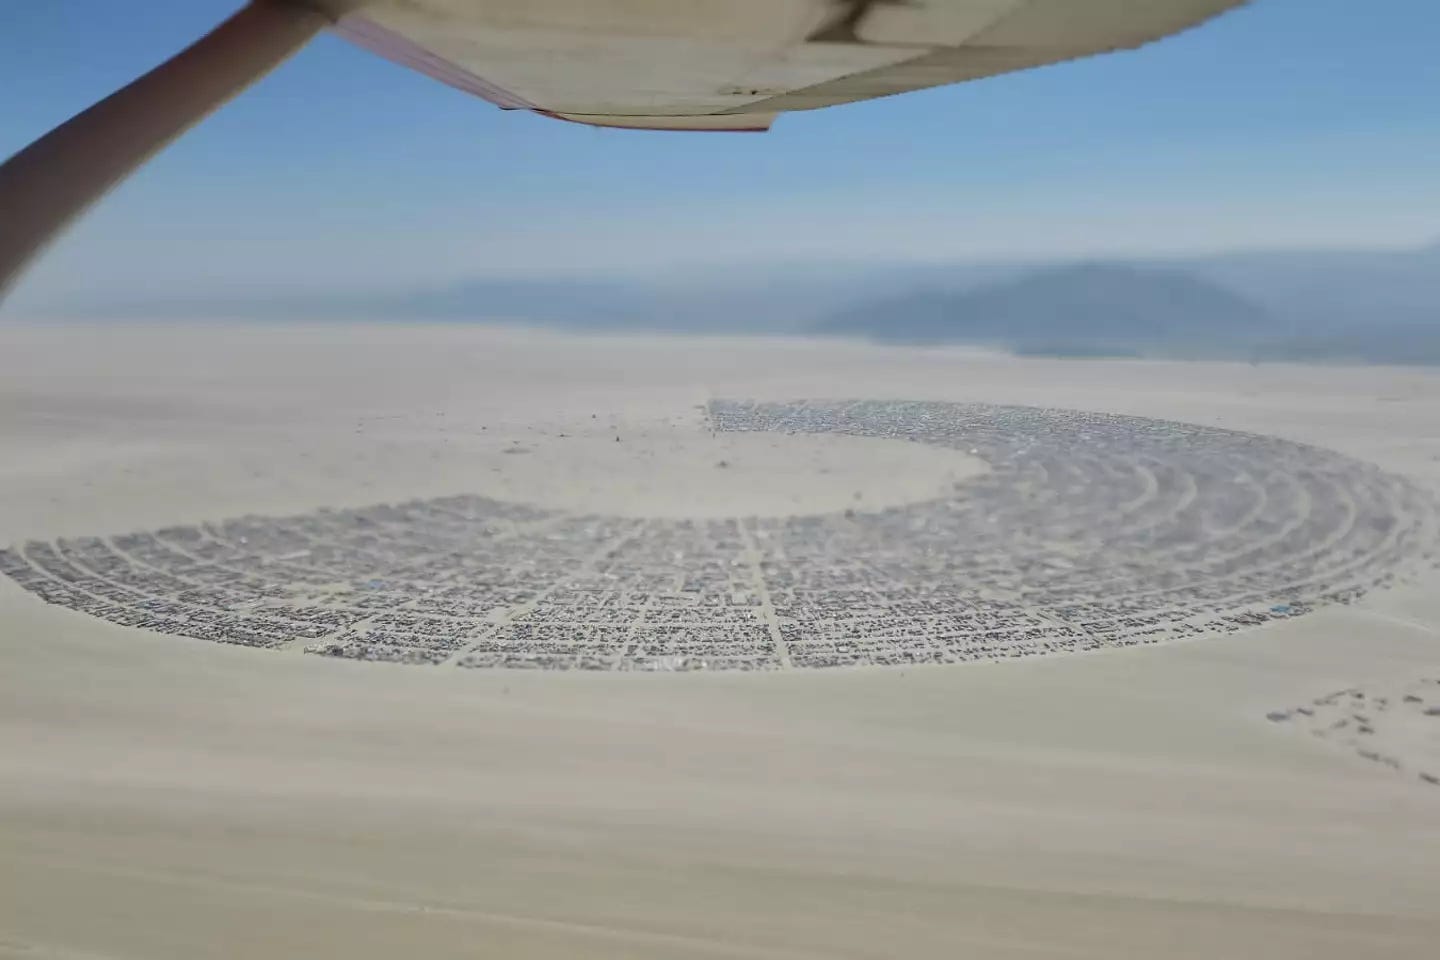 Overhead view of Black Rock City during Burning Man